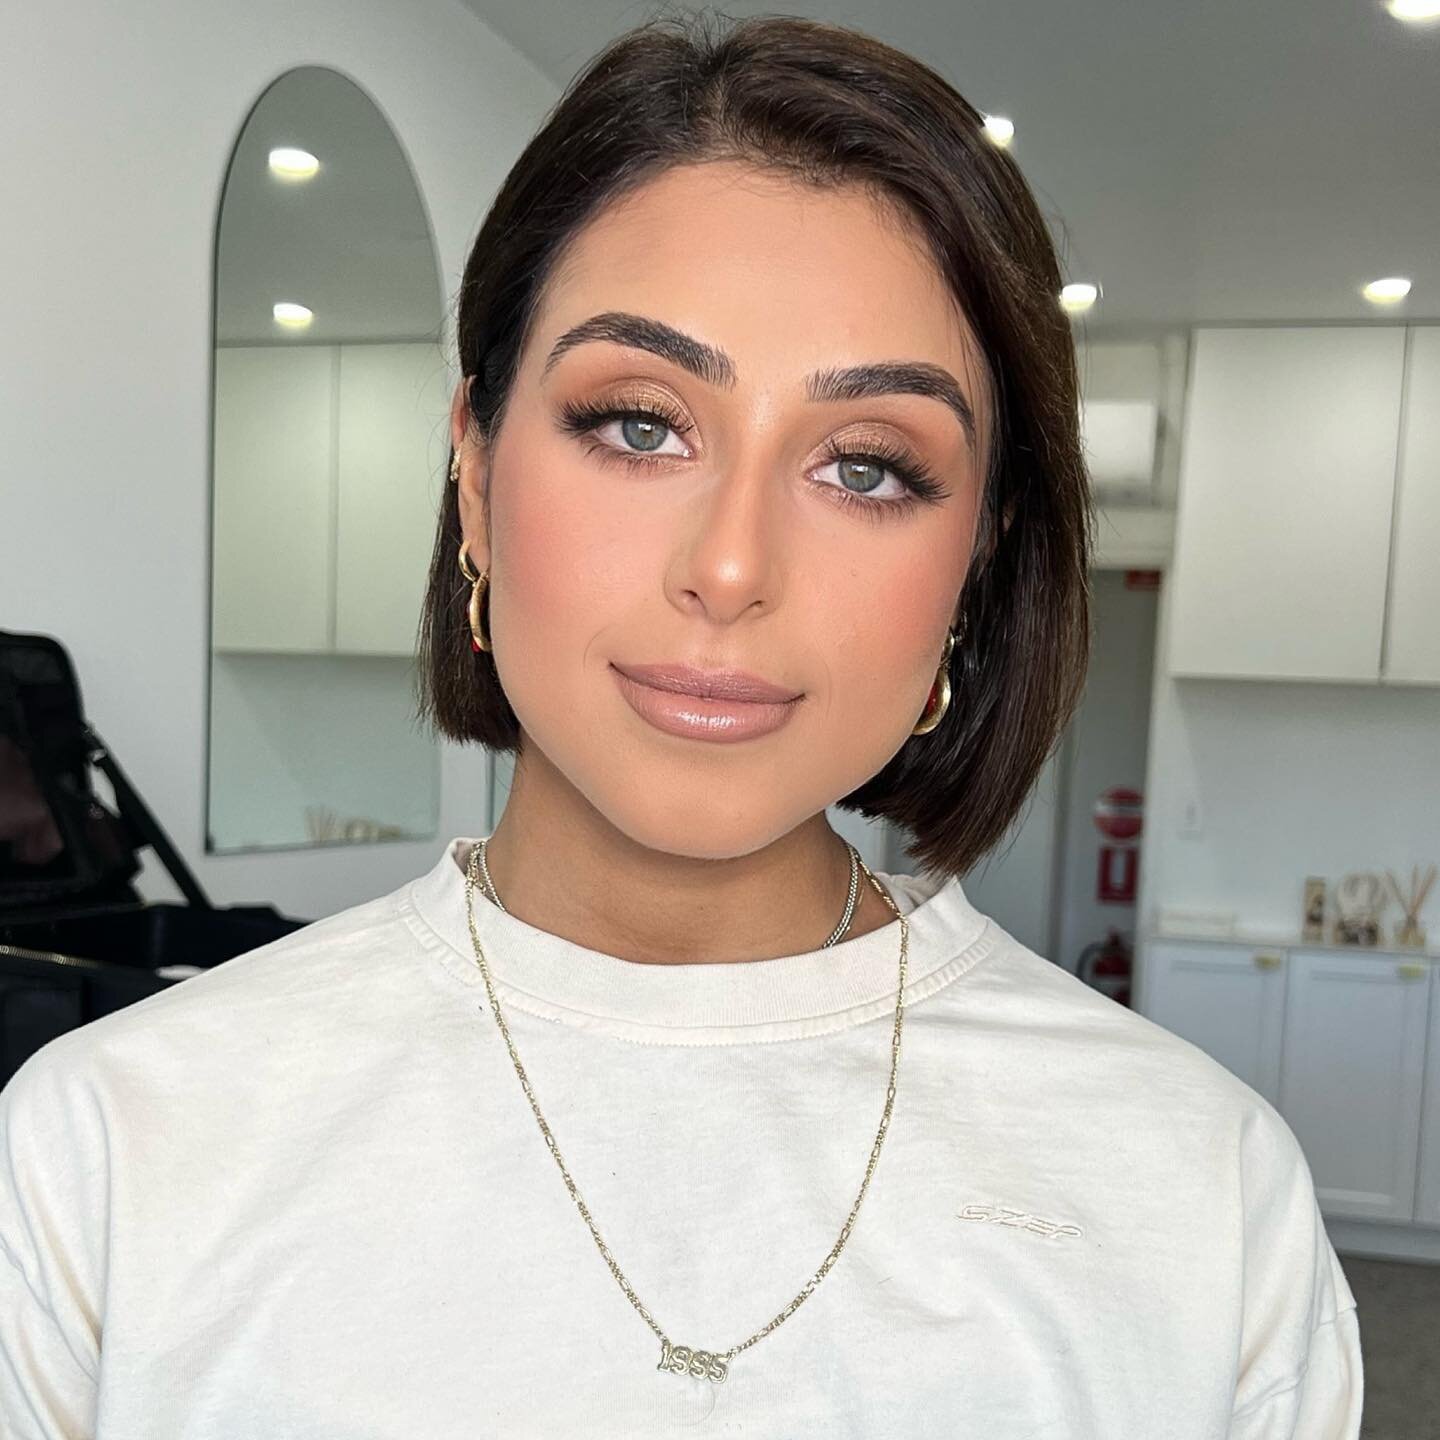 Soft glam is timeless for any makeup event ! It strikes the perfect balance between natural beauty and a touch of elegance.

Who agrees?
Let me know in the comments below!

Key Makeup Products:
@_ahcosmetics brushes 
@danessamyricksbeauty 
Beauty Oil